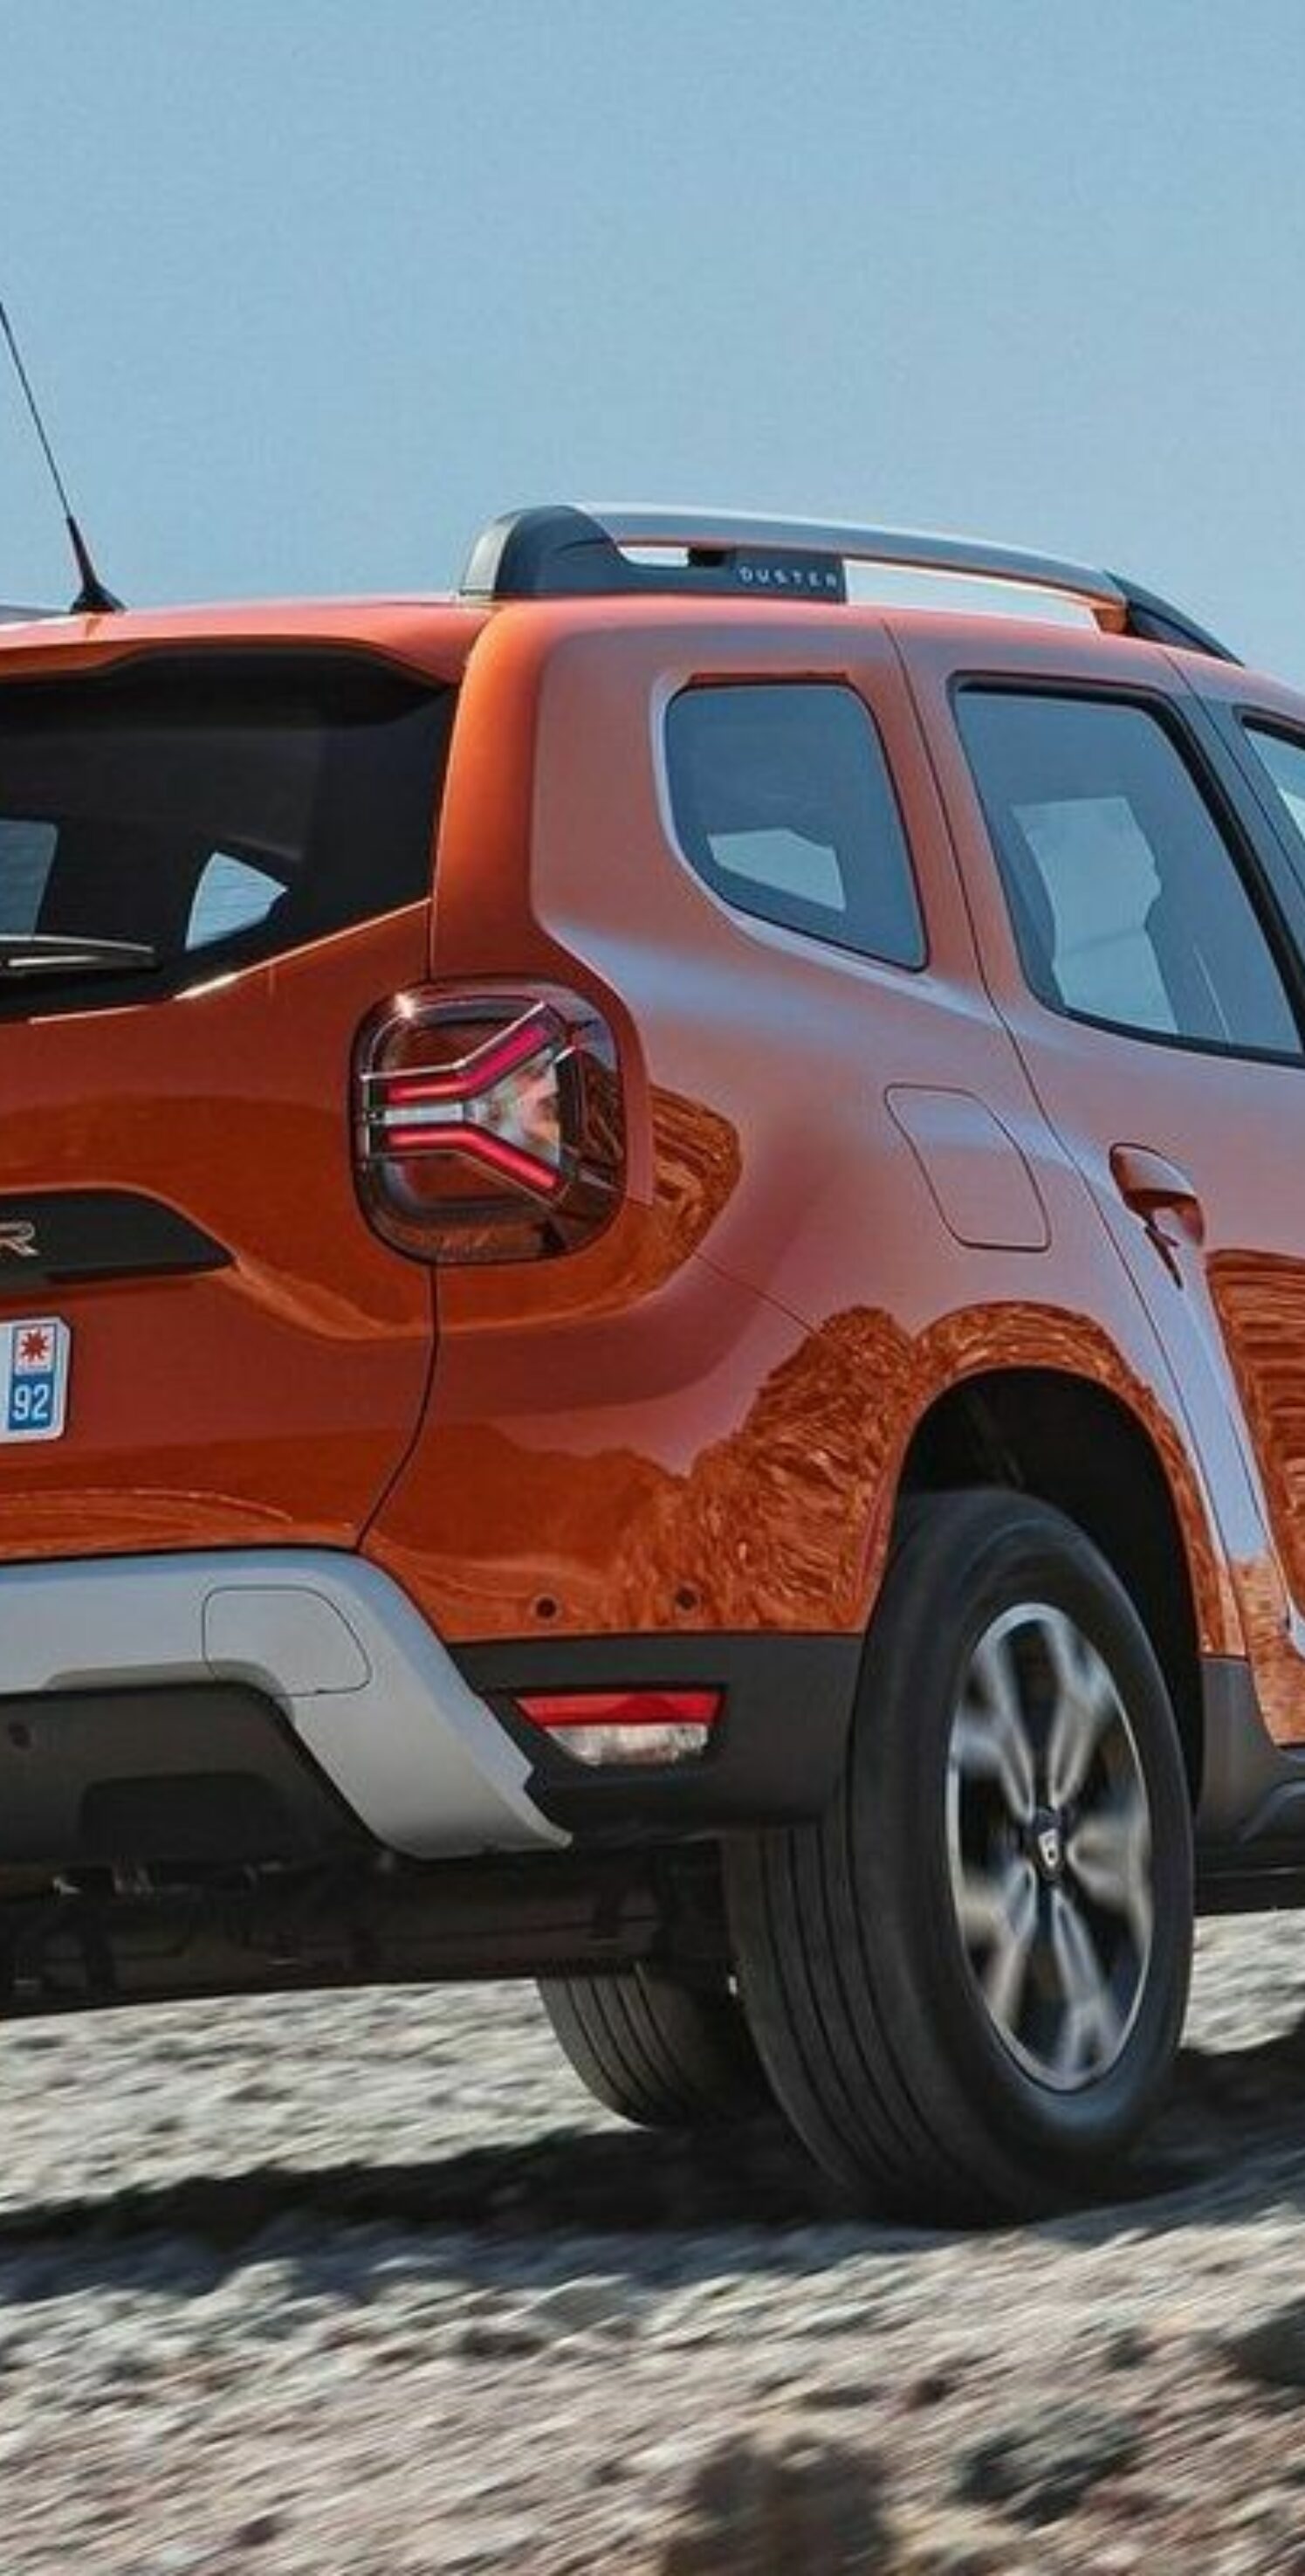 https://autofilter.sk/assets/images/duster/gallery/dacia-duster-2021_13-galeria.jpeg - obrazok